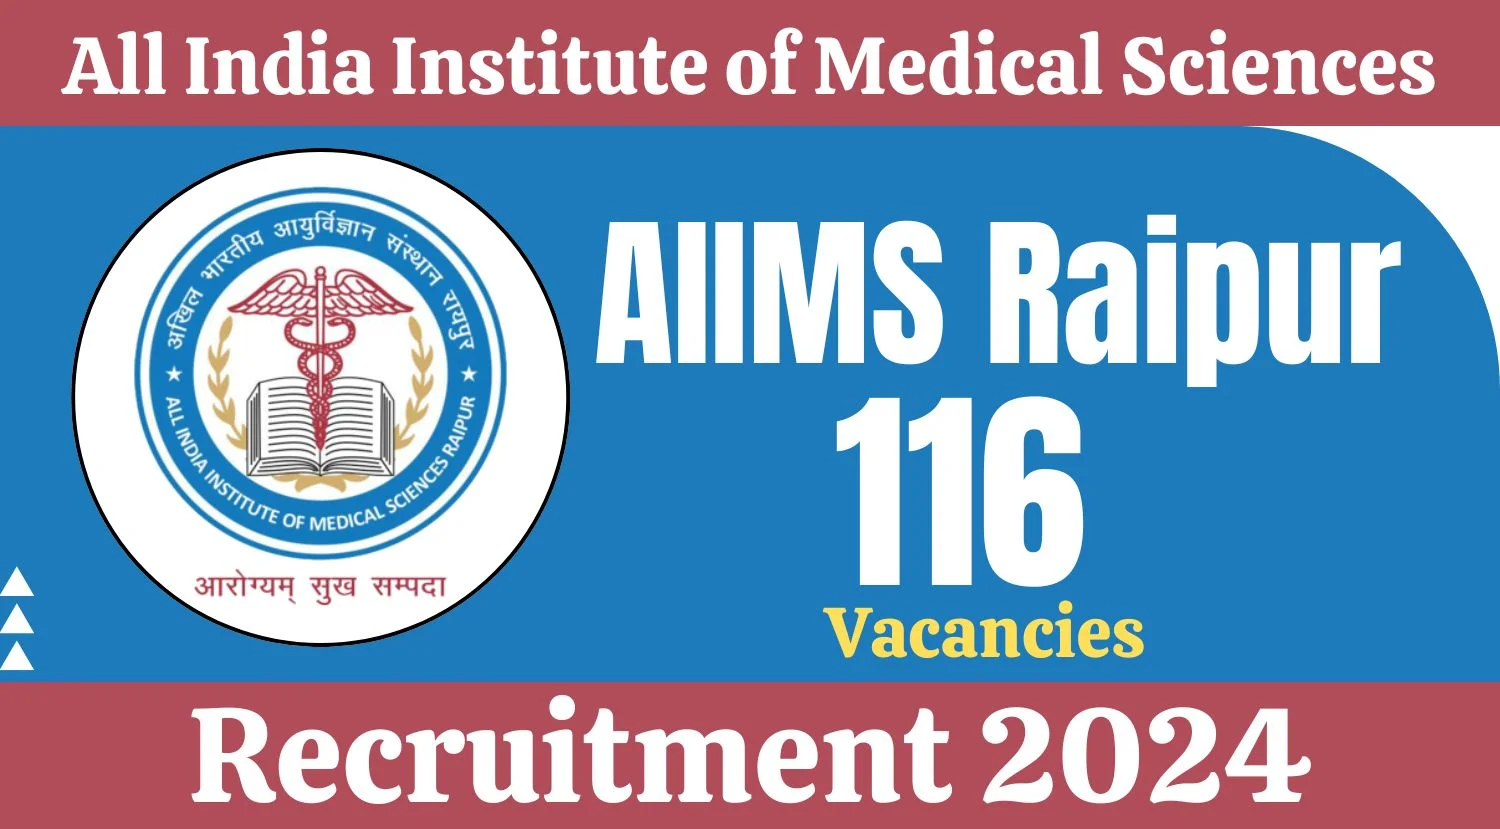 AIIMS Raipur Recruitment 2024 Notification Out for 116 Vacancies